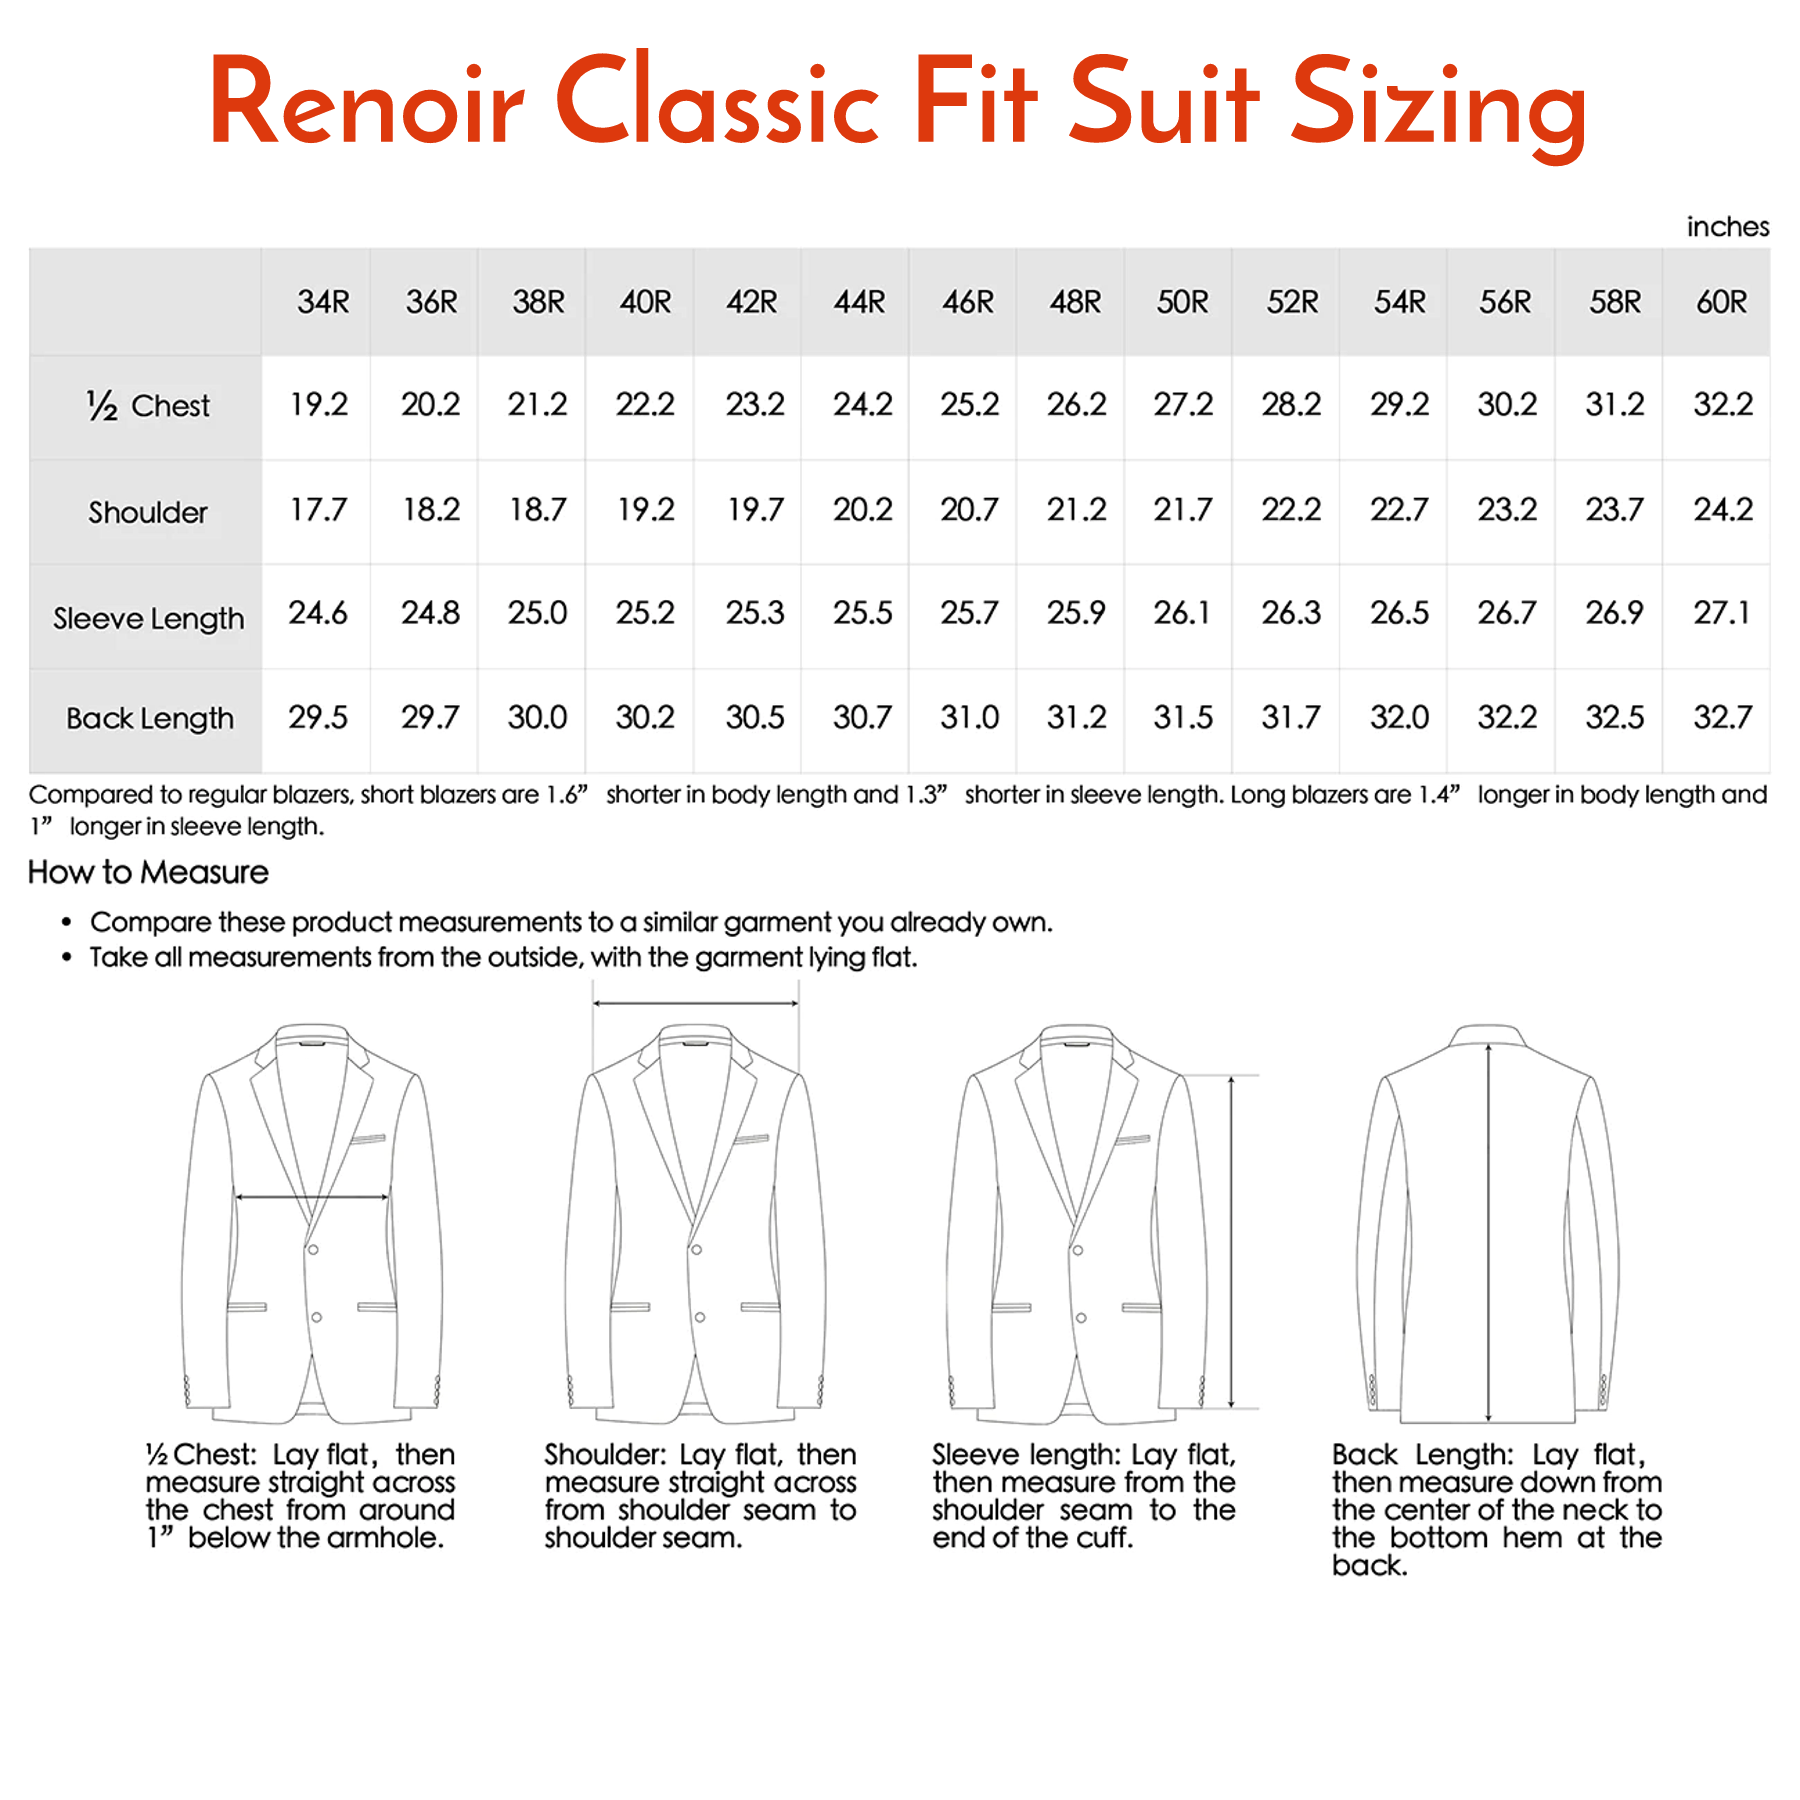 Super 140s Wool 2-Button CLASSIC FIT Suit in Tan (Short, Regular, and Long Available) by Renoir